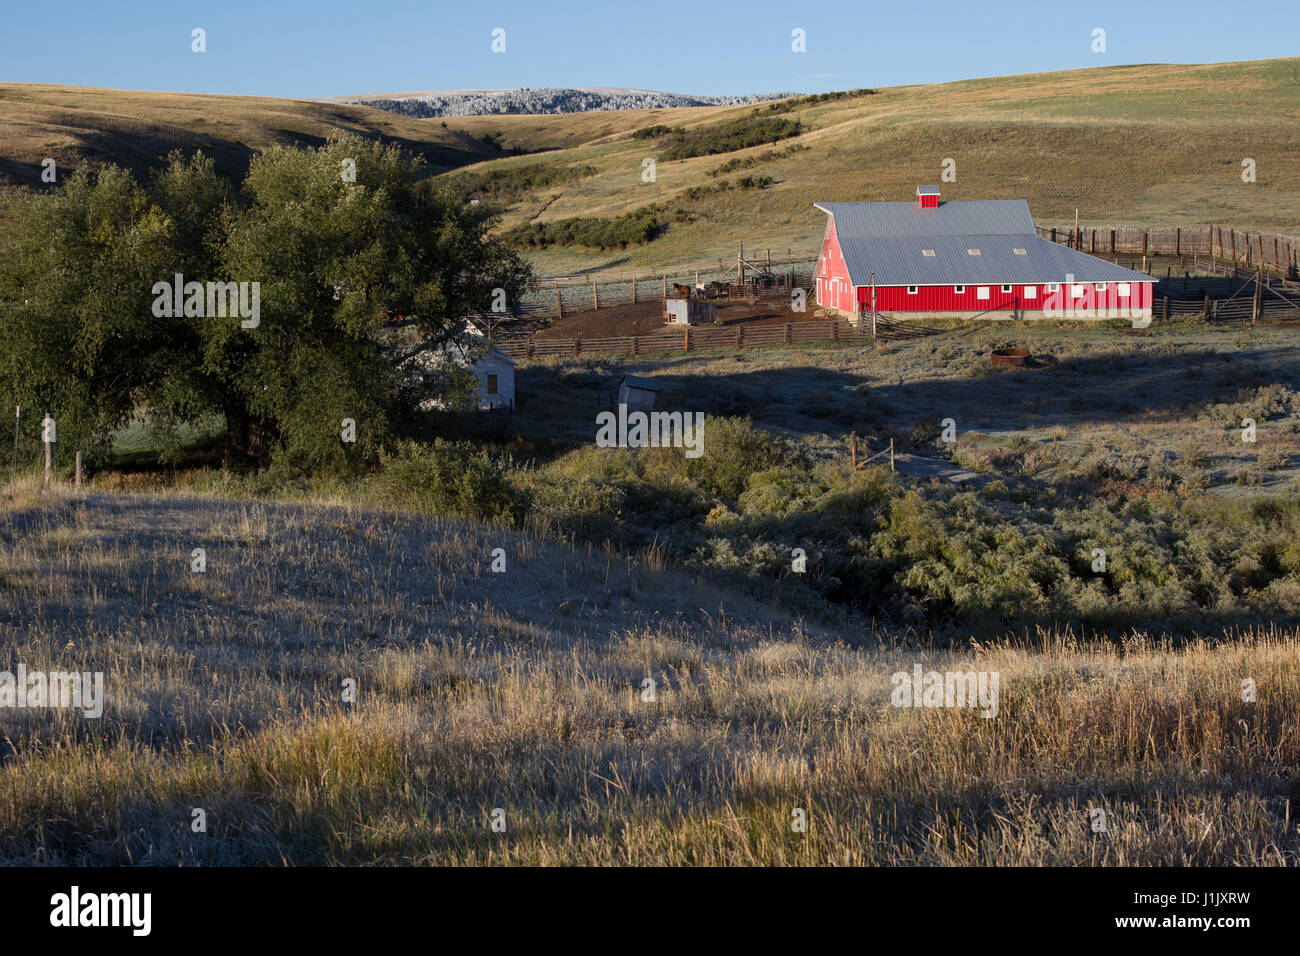 Early morning light casts a glow on a red barn. Cottonwood trees, sage brush and a creek complete this Montana prairie scene. Stock Photo